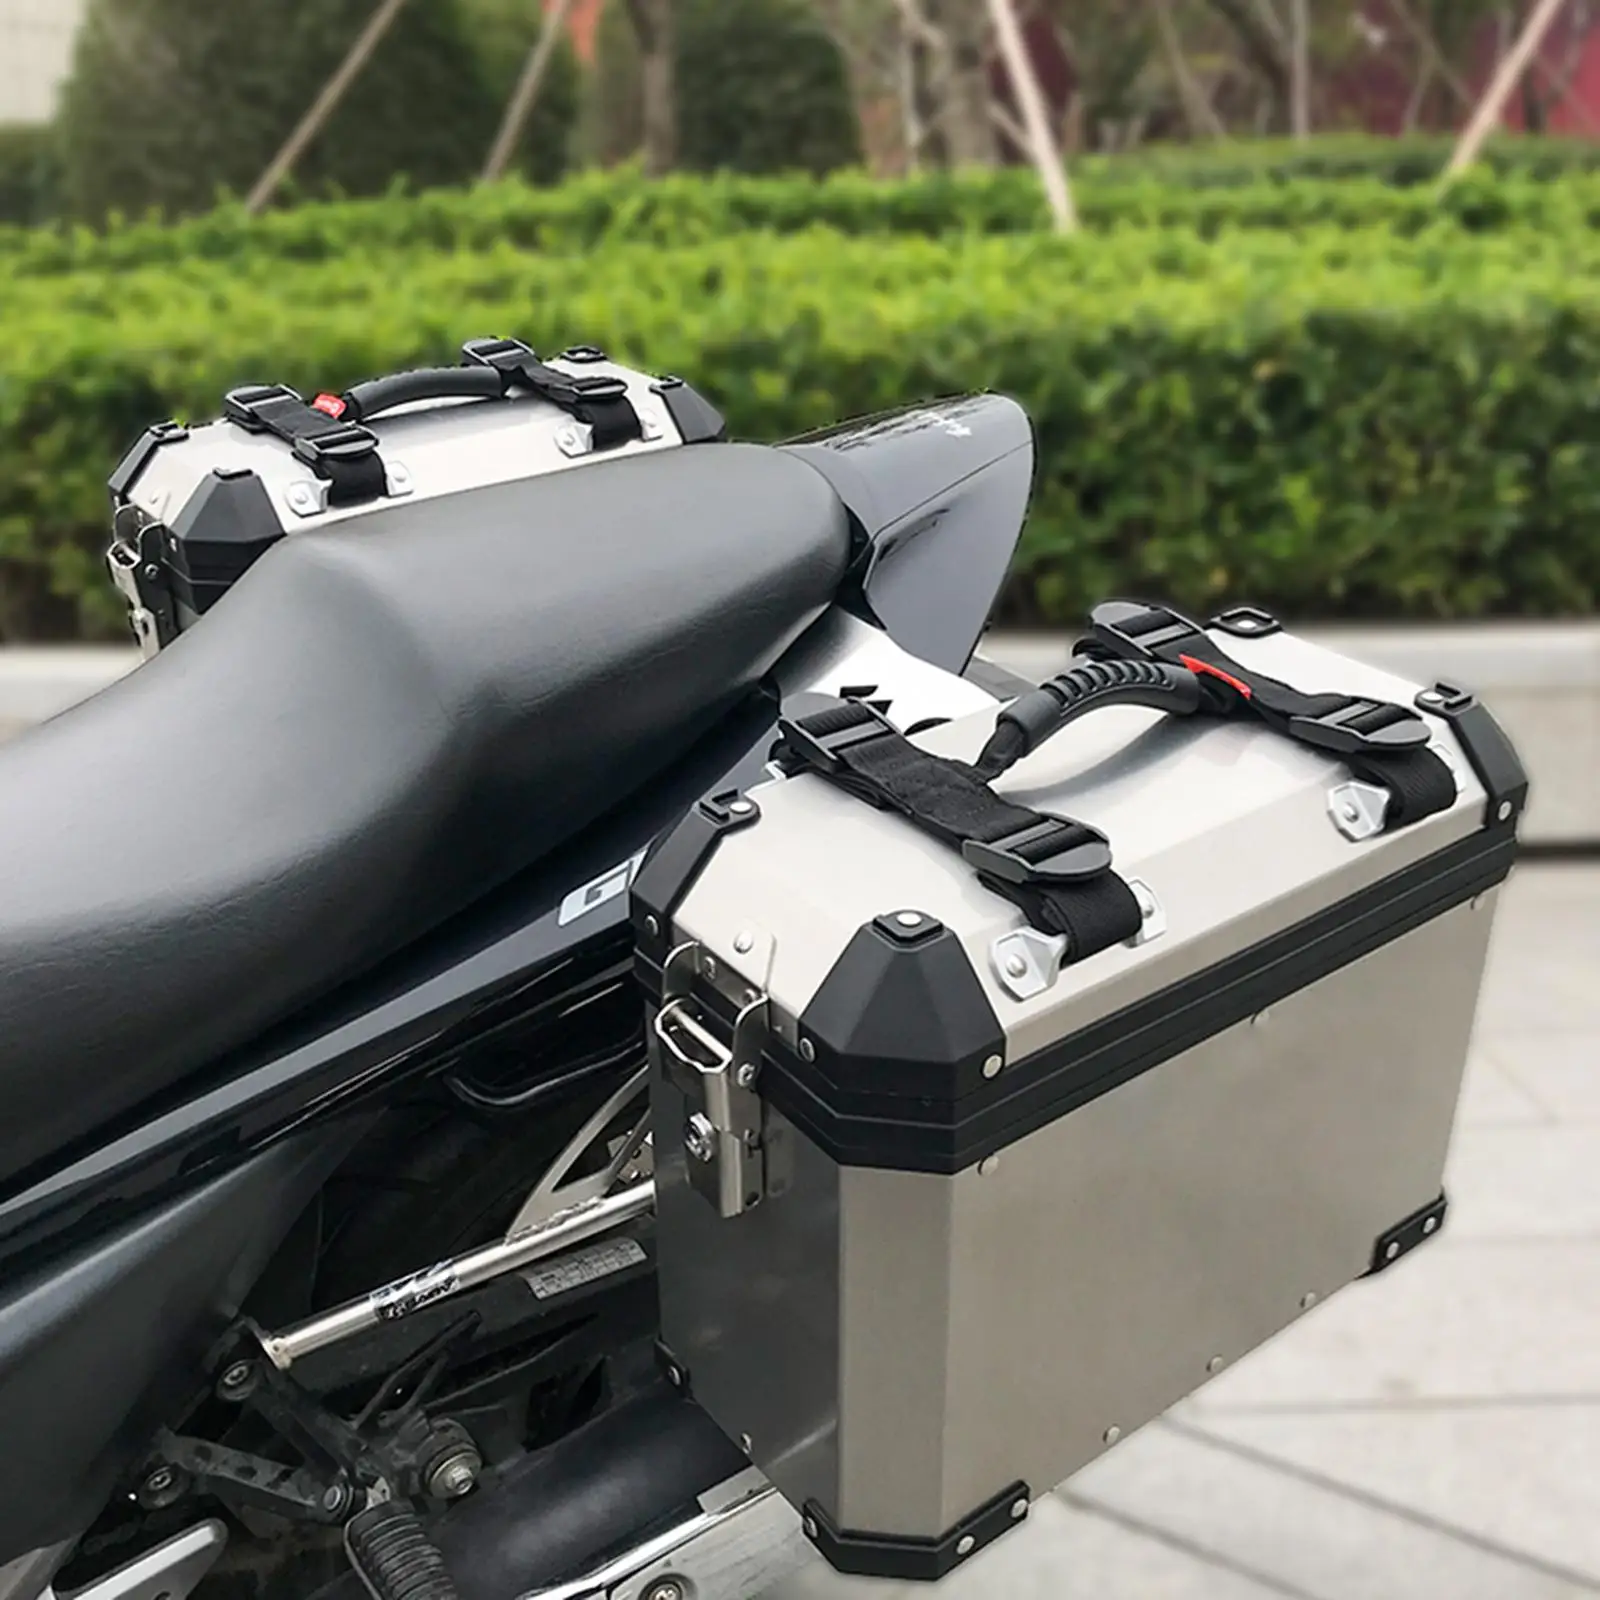 Motorcycle Rope Handle Accessories Fit for Case Aluminum Alloy Side Box F800GS Adv R1200GS R1250GS